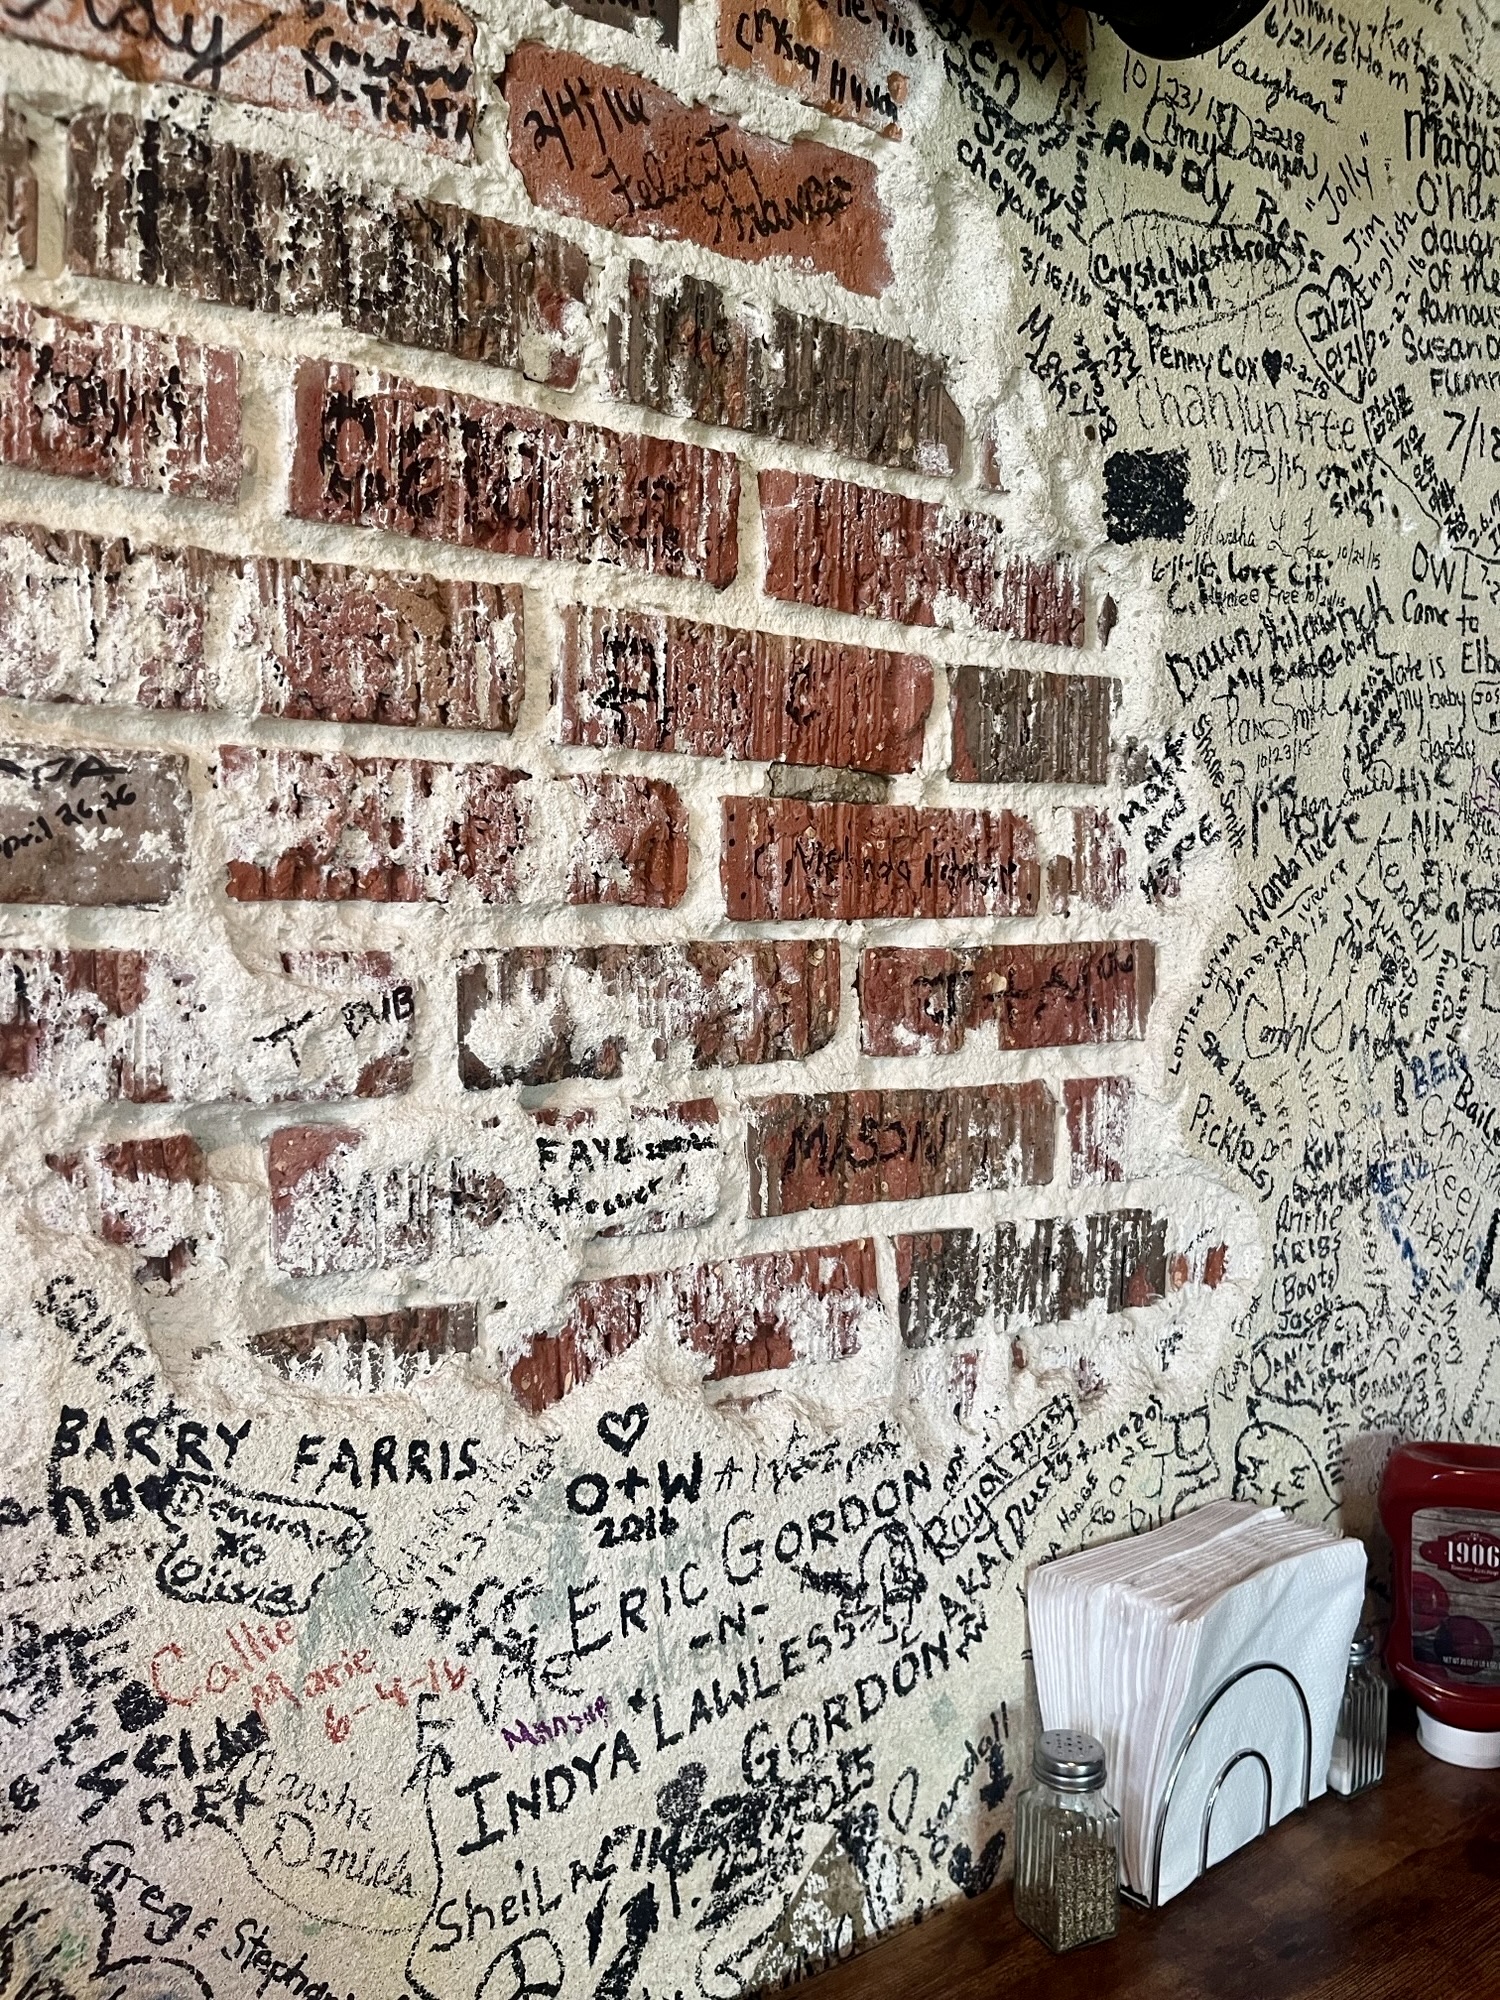 a restaurant table sits next to an exposed brick wall with messages and names written in permenant marker